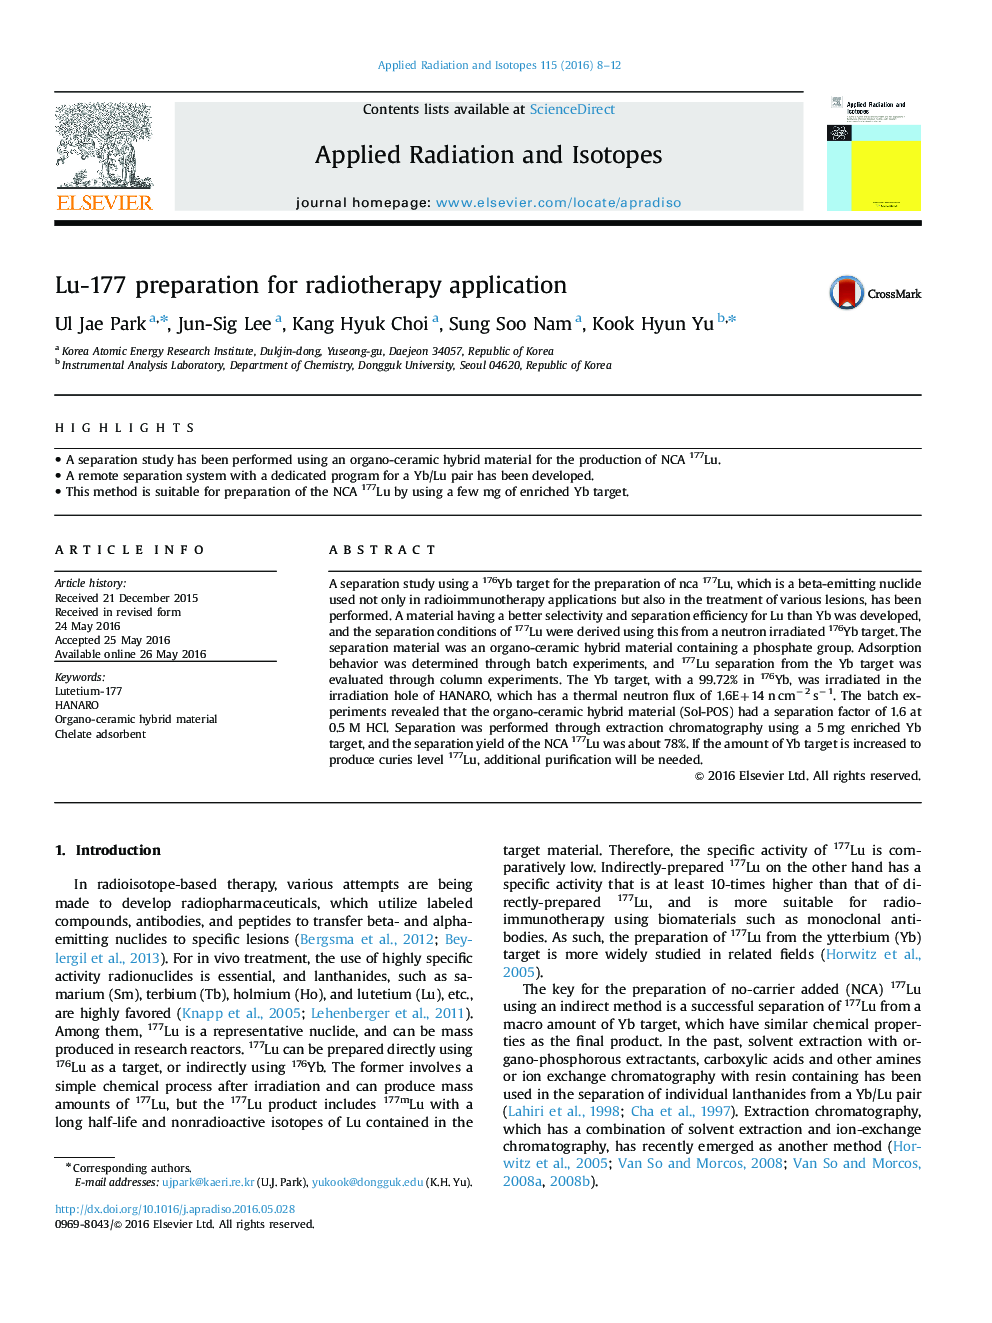 Lu-177 preparation for radiotherapy application